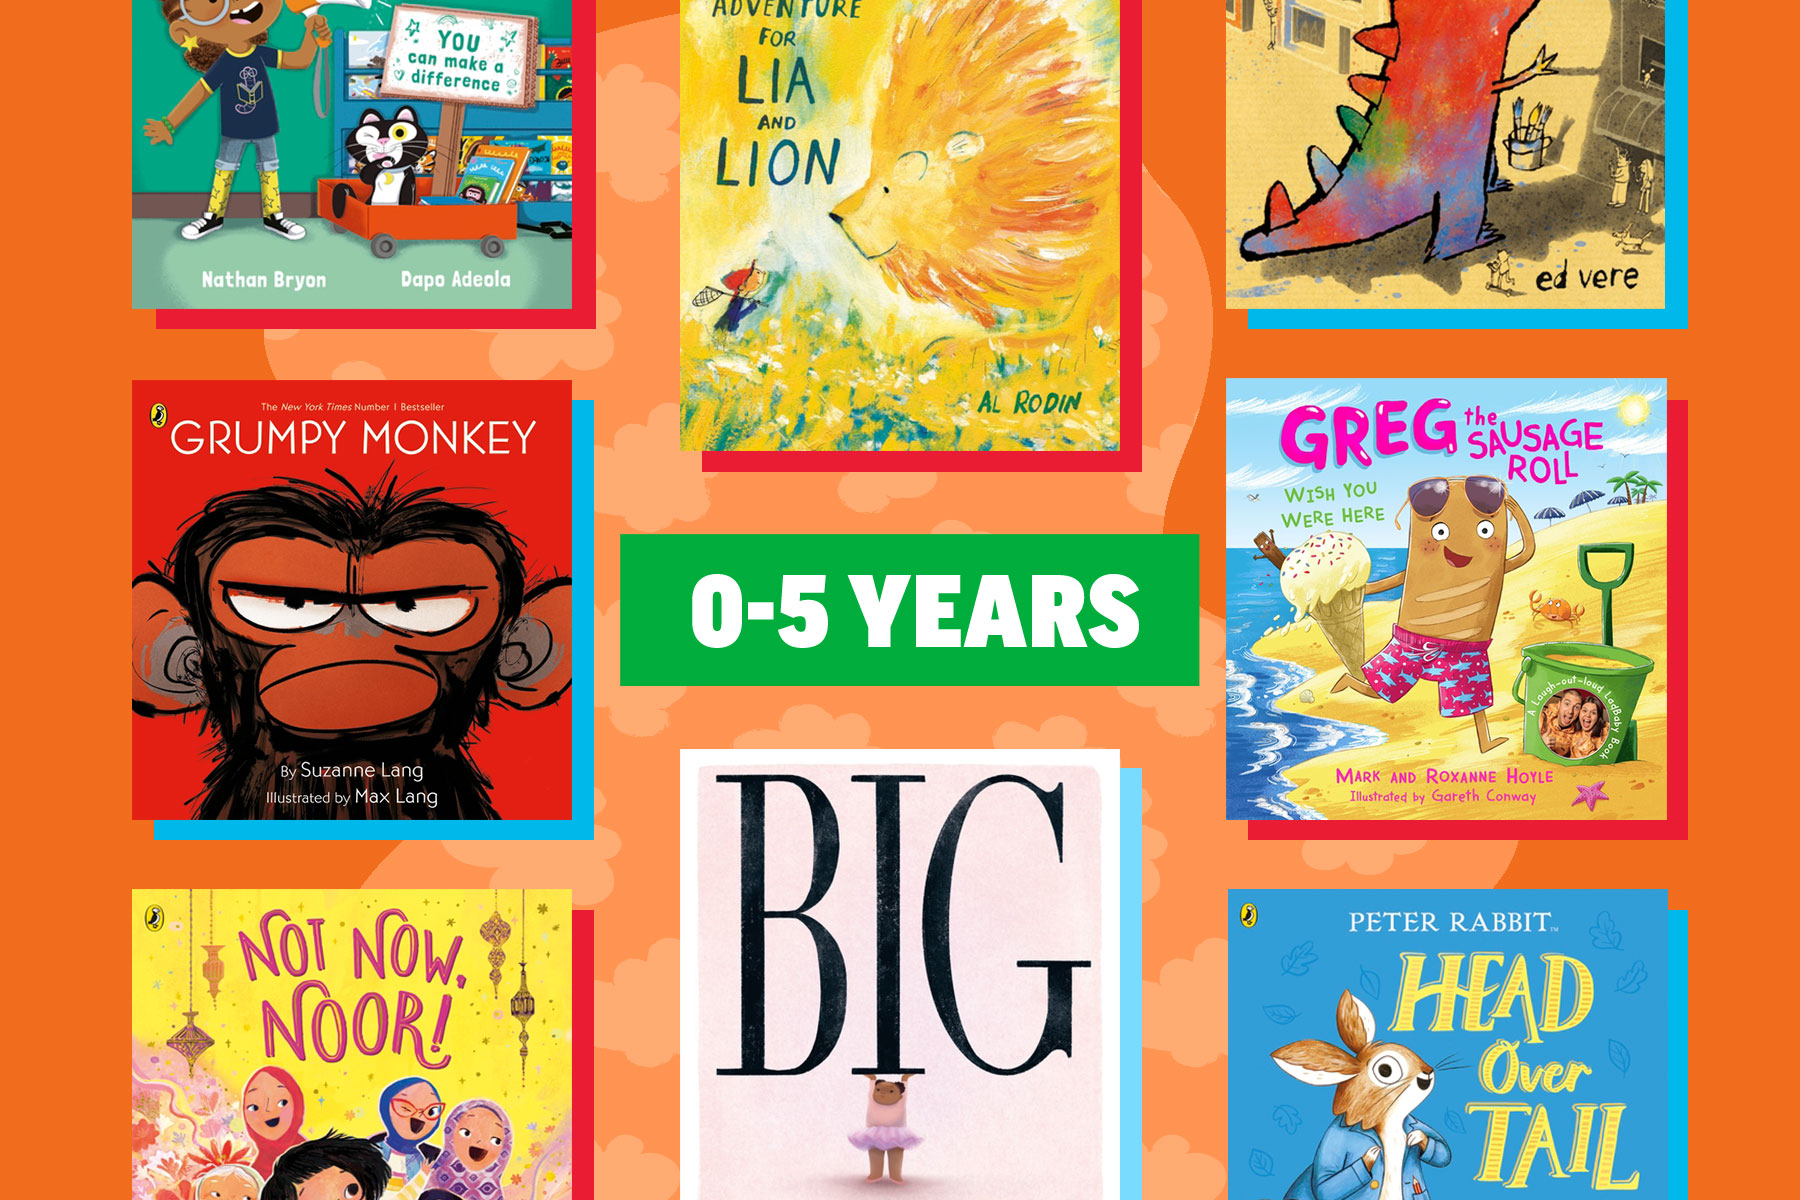 An image of a selection of books for under 5s on an orange background with a large splodge and cloud print